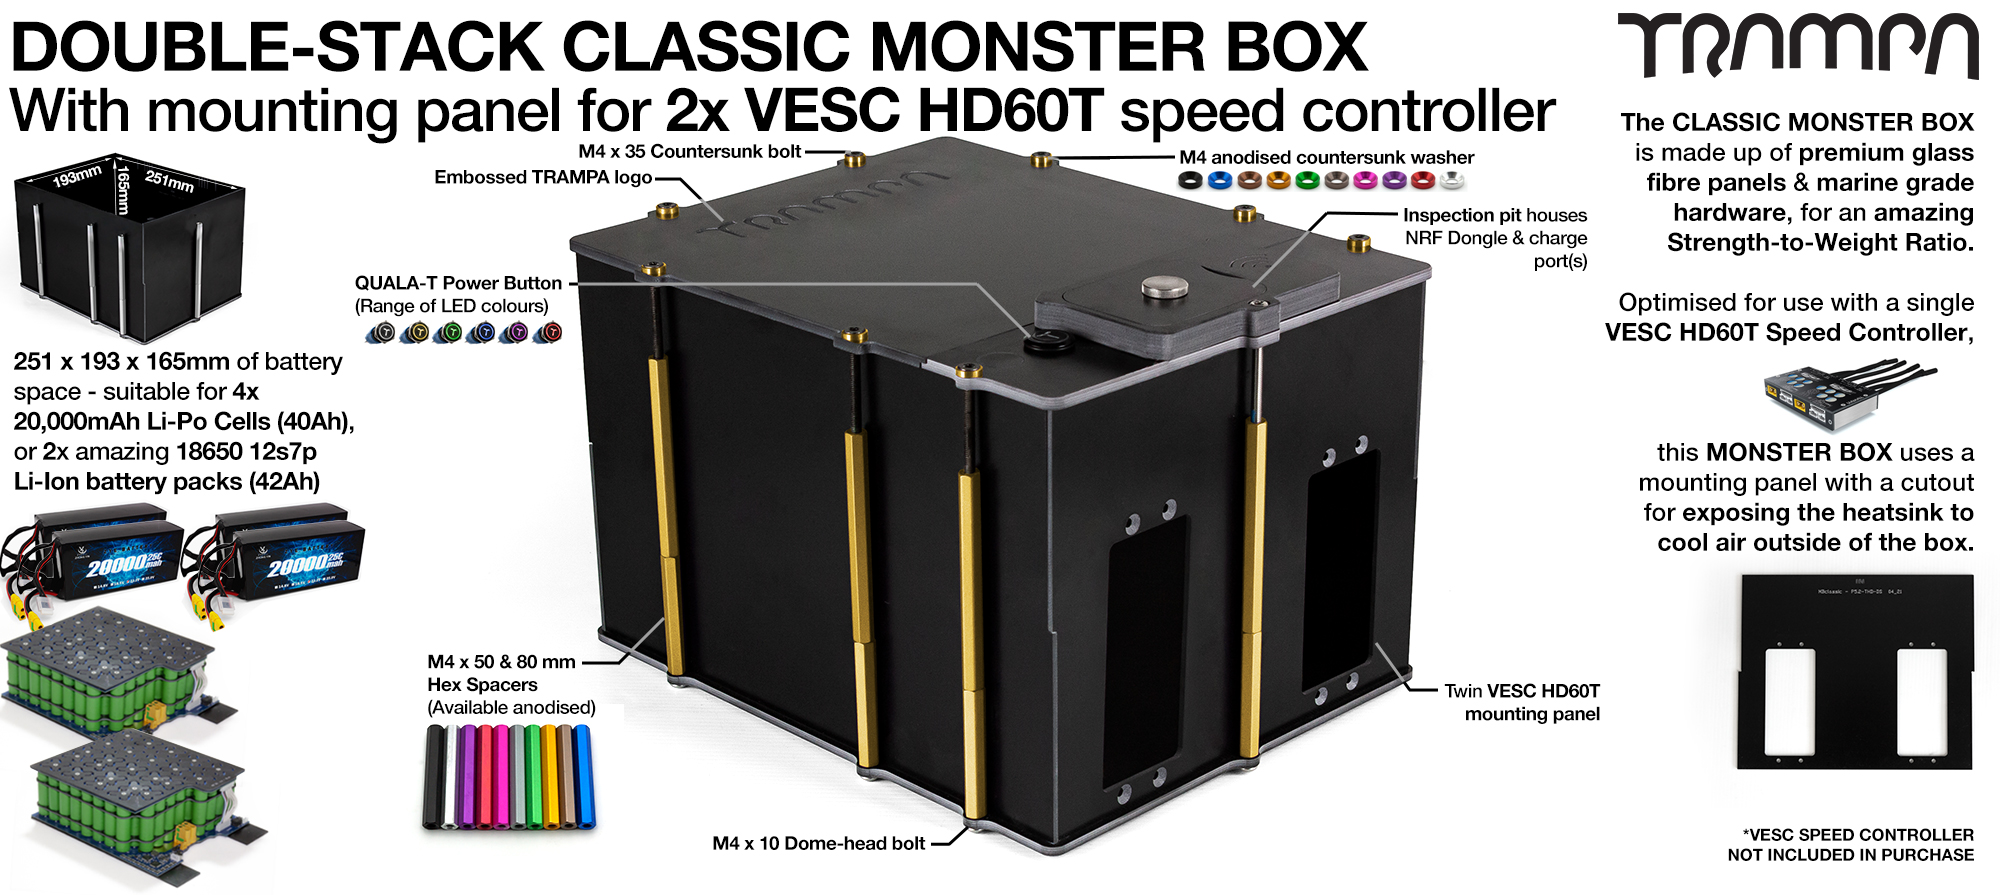 Classic MONSTER Box DOUBLE STACKER fits 168x 18650 cells to give 42Ah Range or 4x 22000Ah Li-Po cells to give 44Ah Range & has Panels to fit 2x VESC HD-60T internally for 4WD